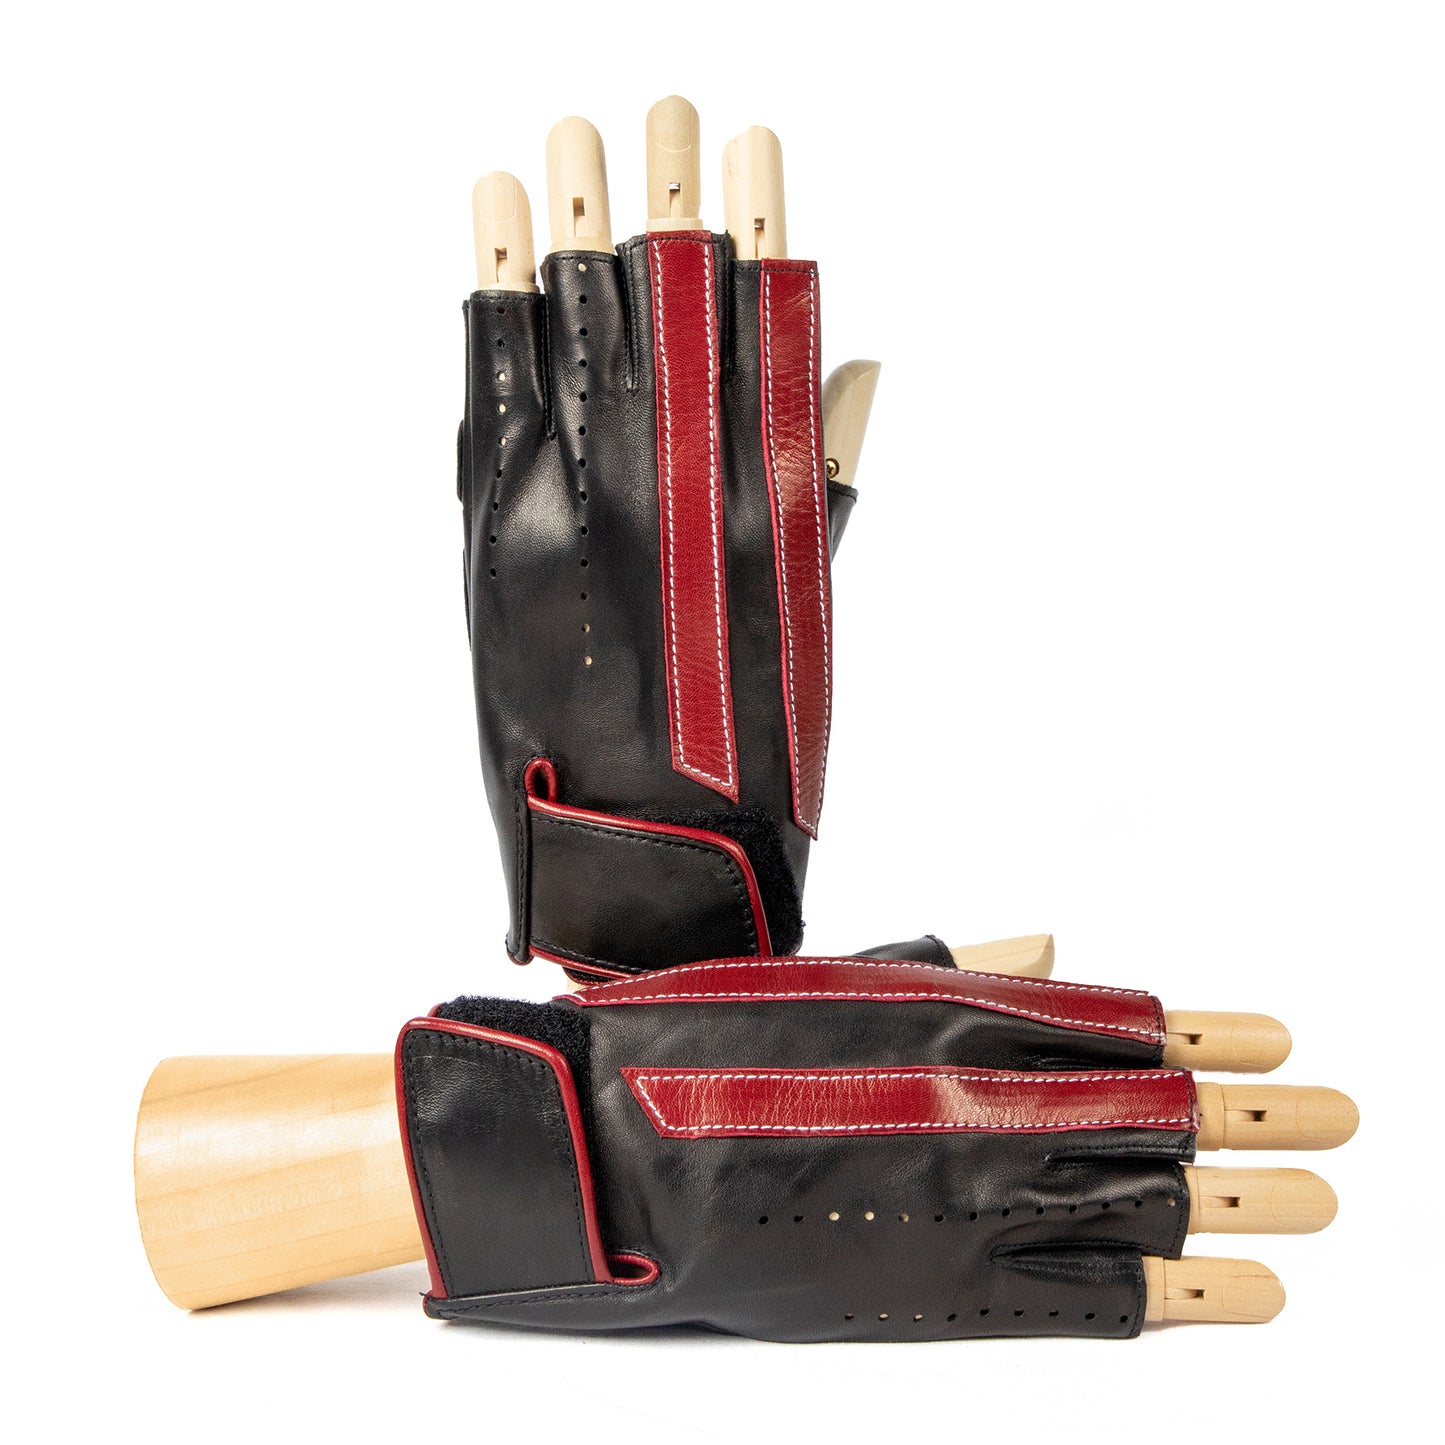 Men's unlined half fingers driving gloves in black nappa leather with red leather strips